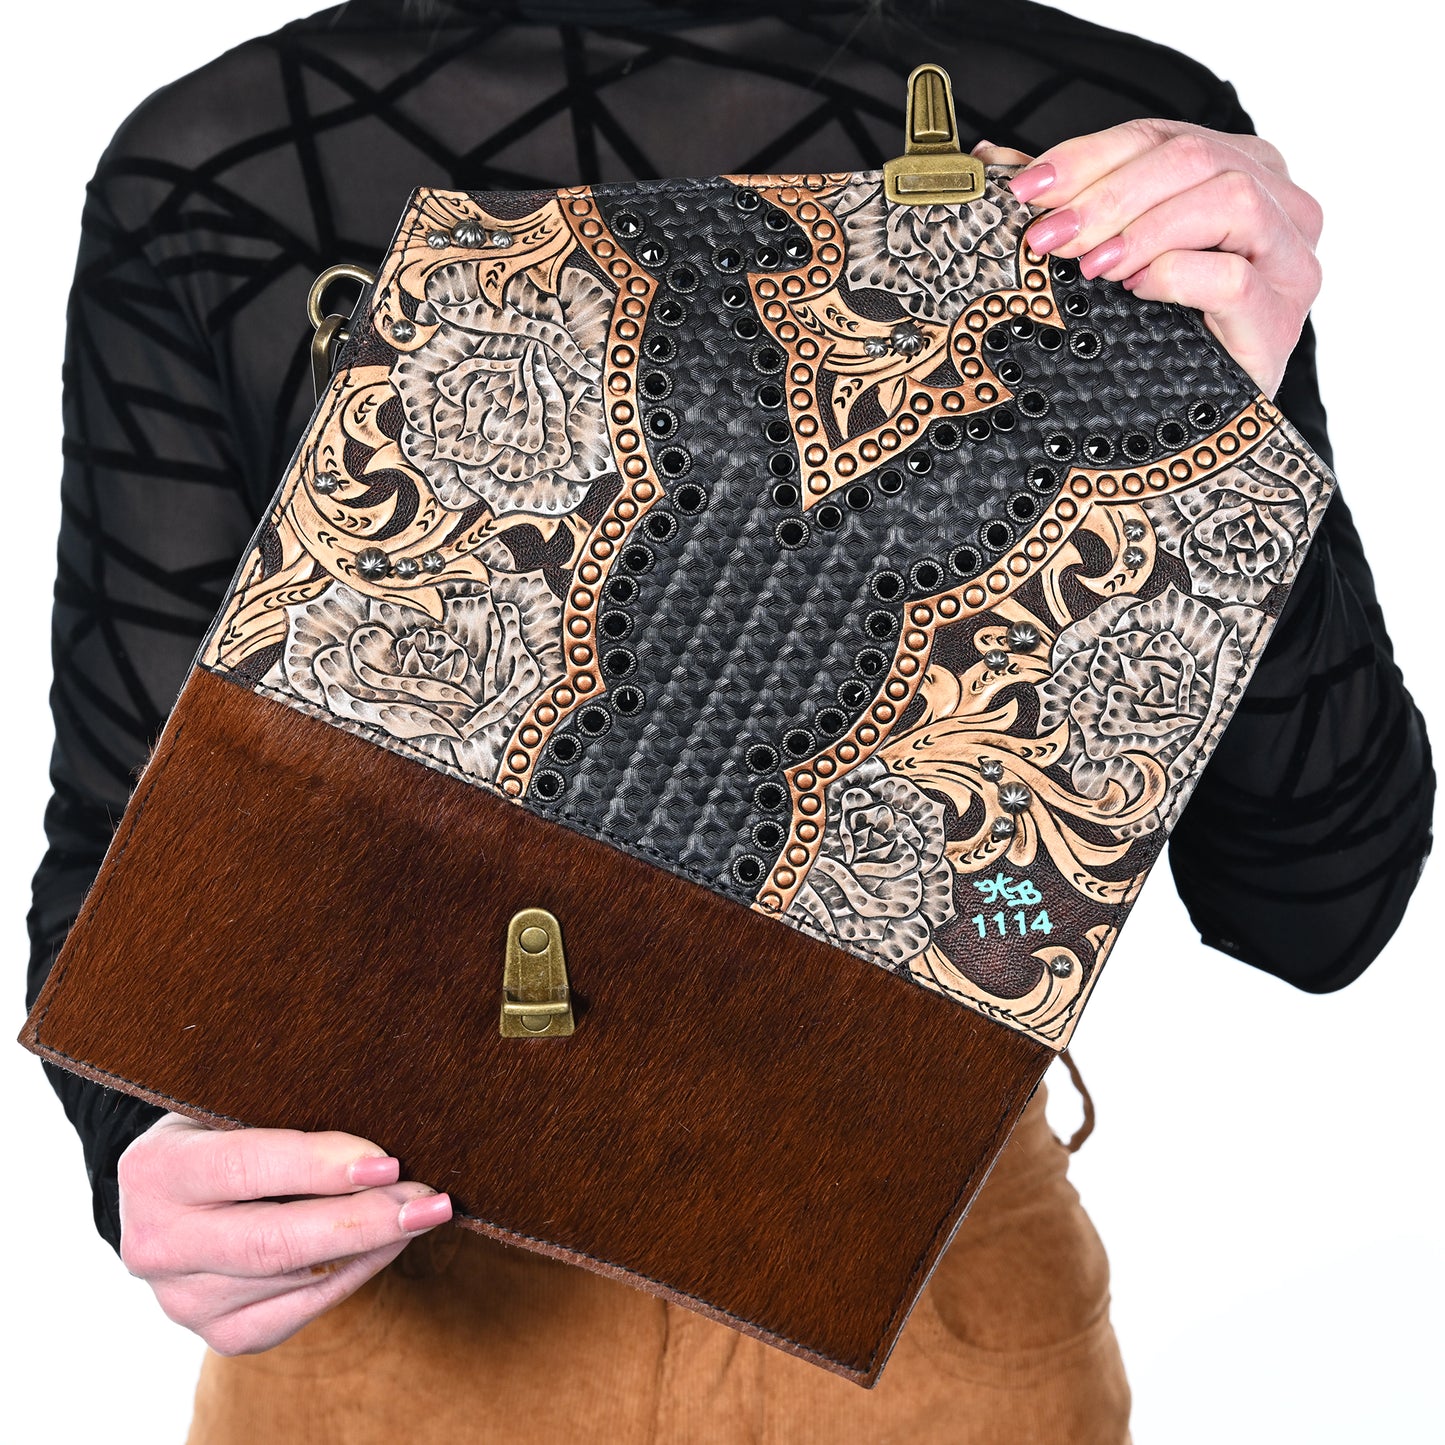 
                  
                    A person holding an Heritage Brand nola clutch #1114 with a combination of textured, embossed designs and a furry lower half.
                  
                